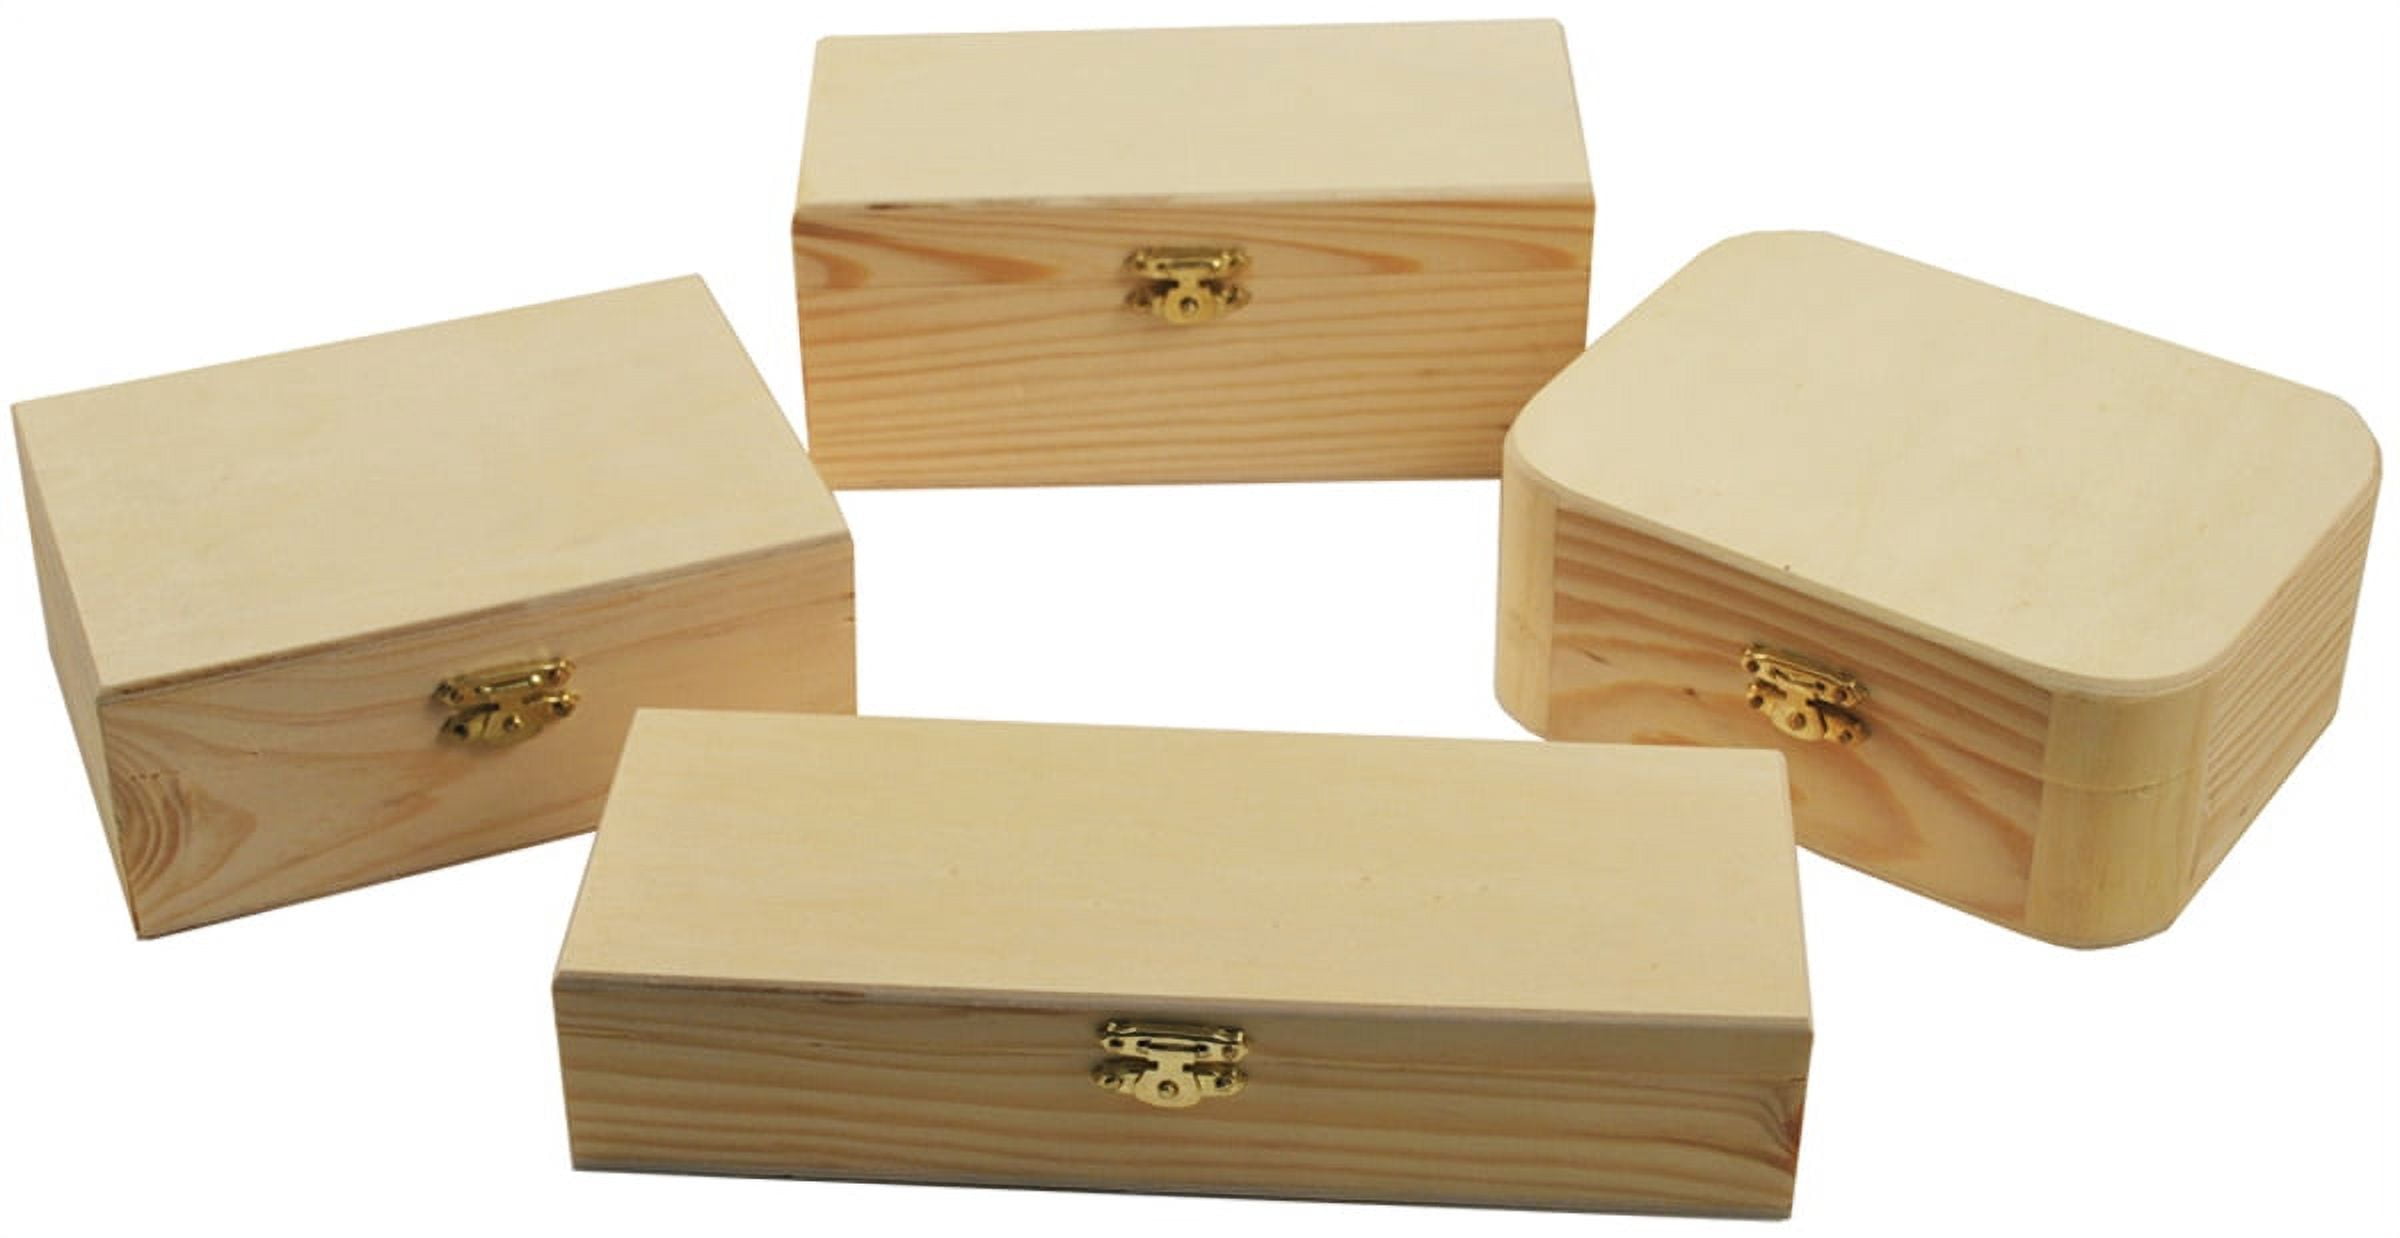  30 Pcs Unfinished Wooden Boxes for Crafts, 16 Pcs 6 x